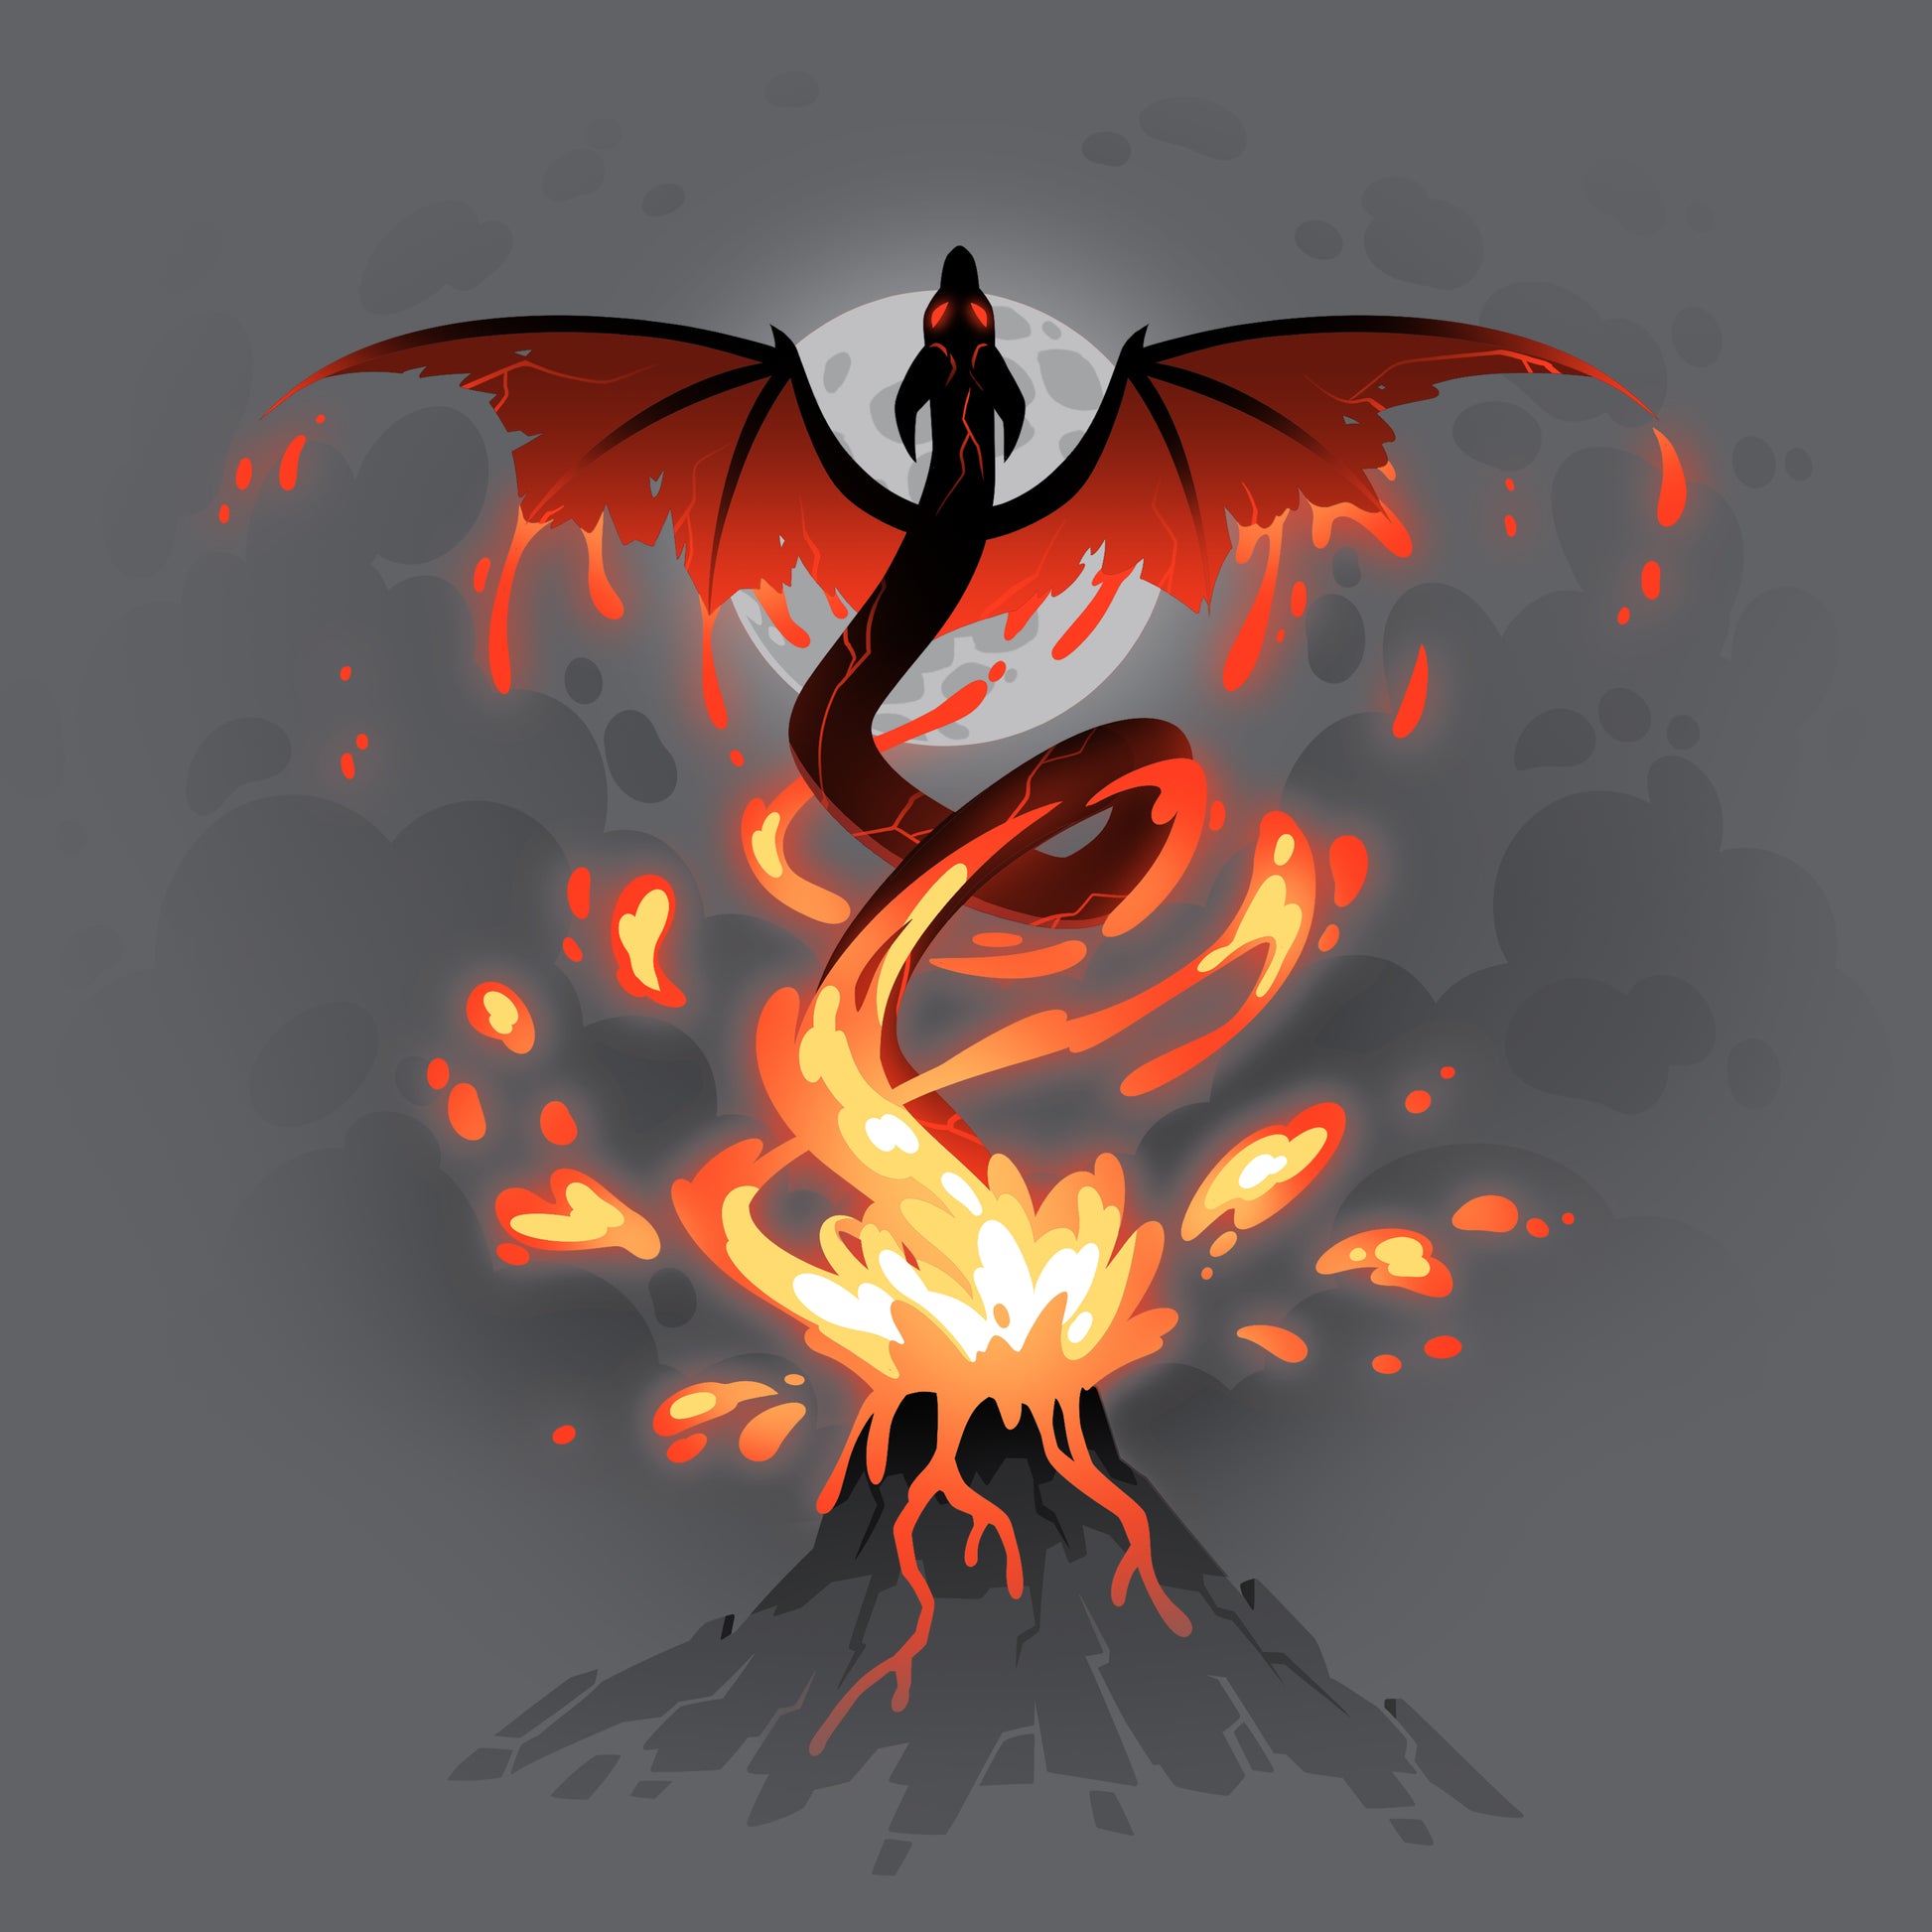 An image of the Scorched Dragon, suitable for a TeeTurtle t-shirt design.